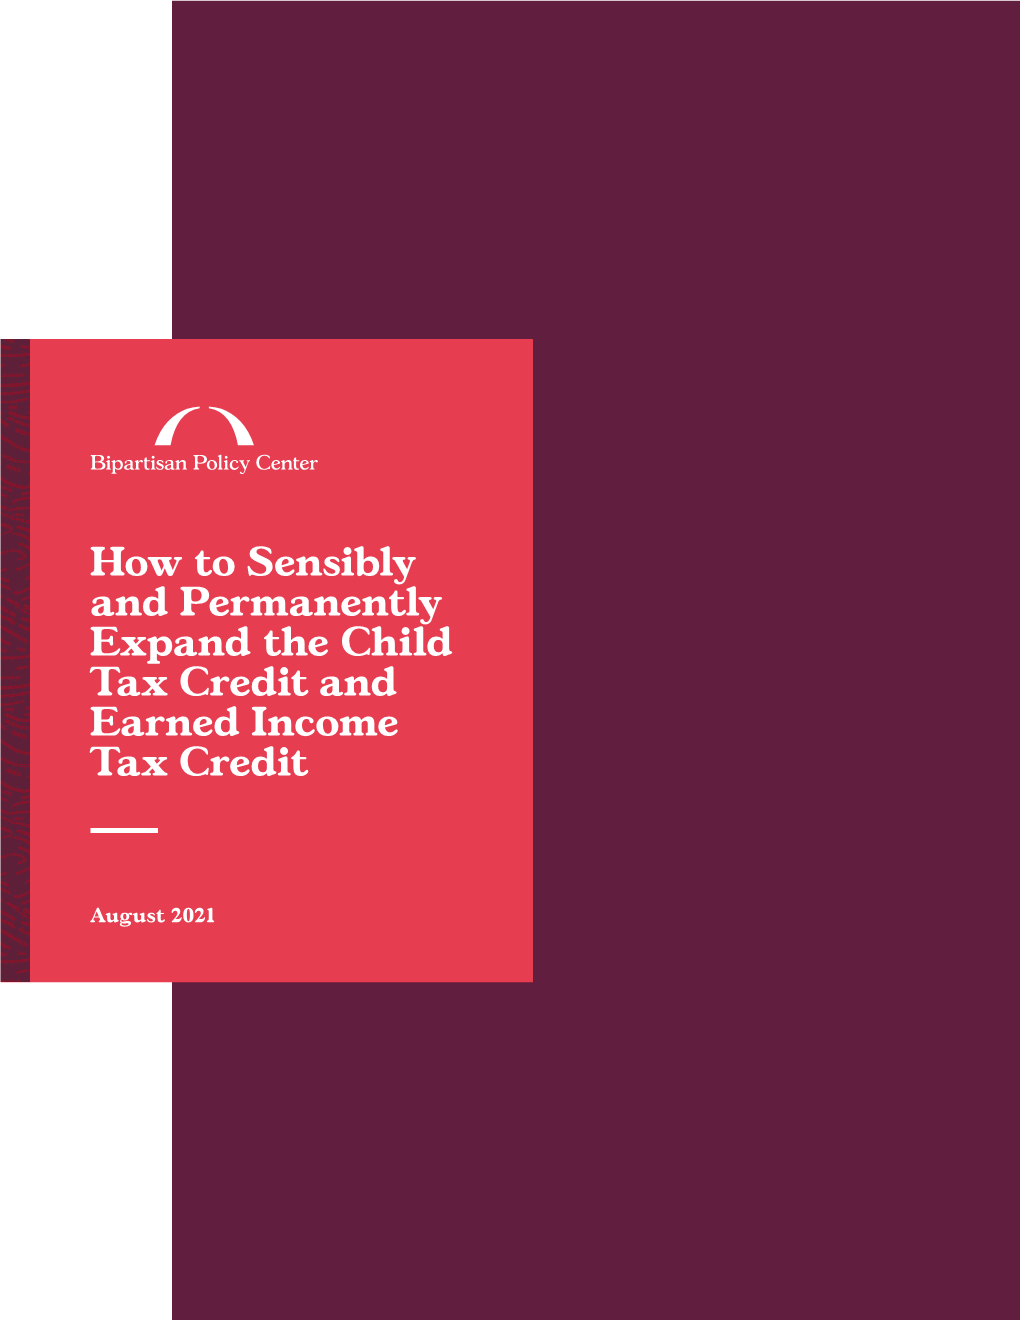 How to Sensibly and Permanently Expand the Child Tax Credit and Earned Income Tax Credit